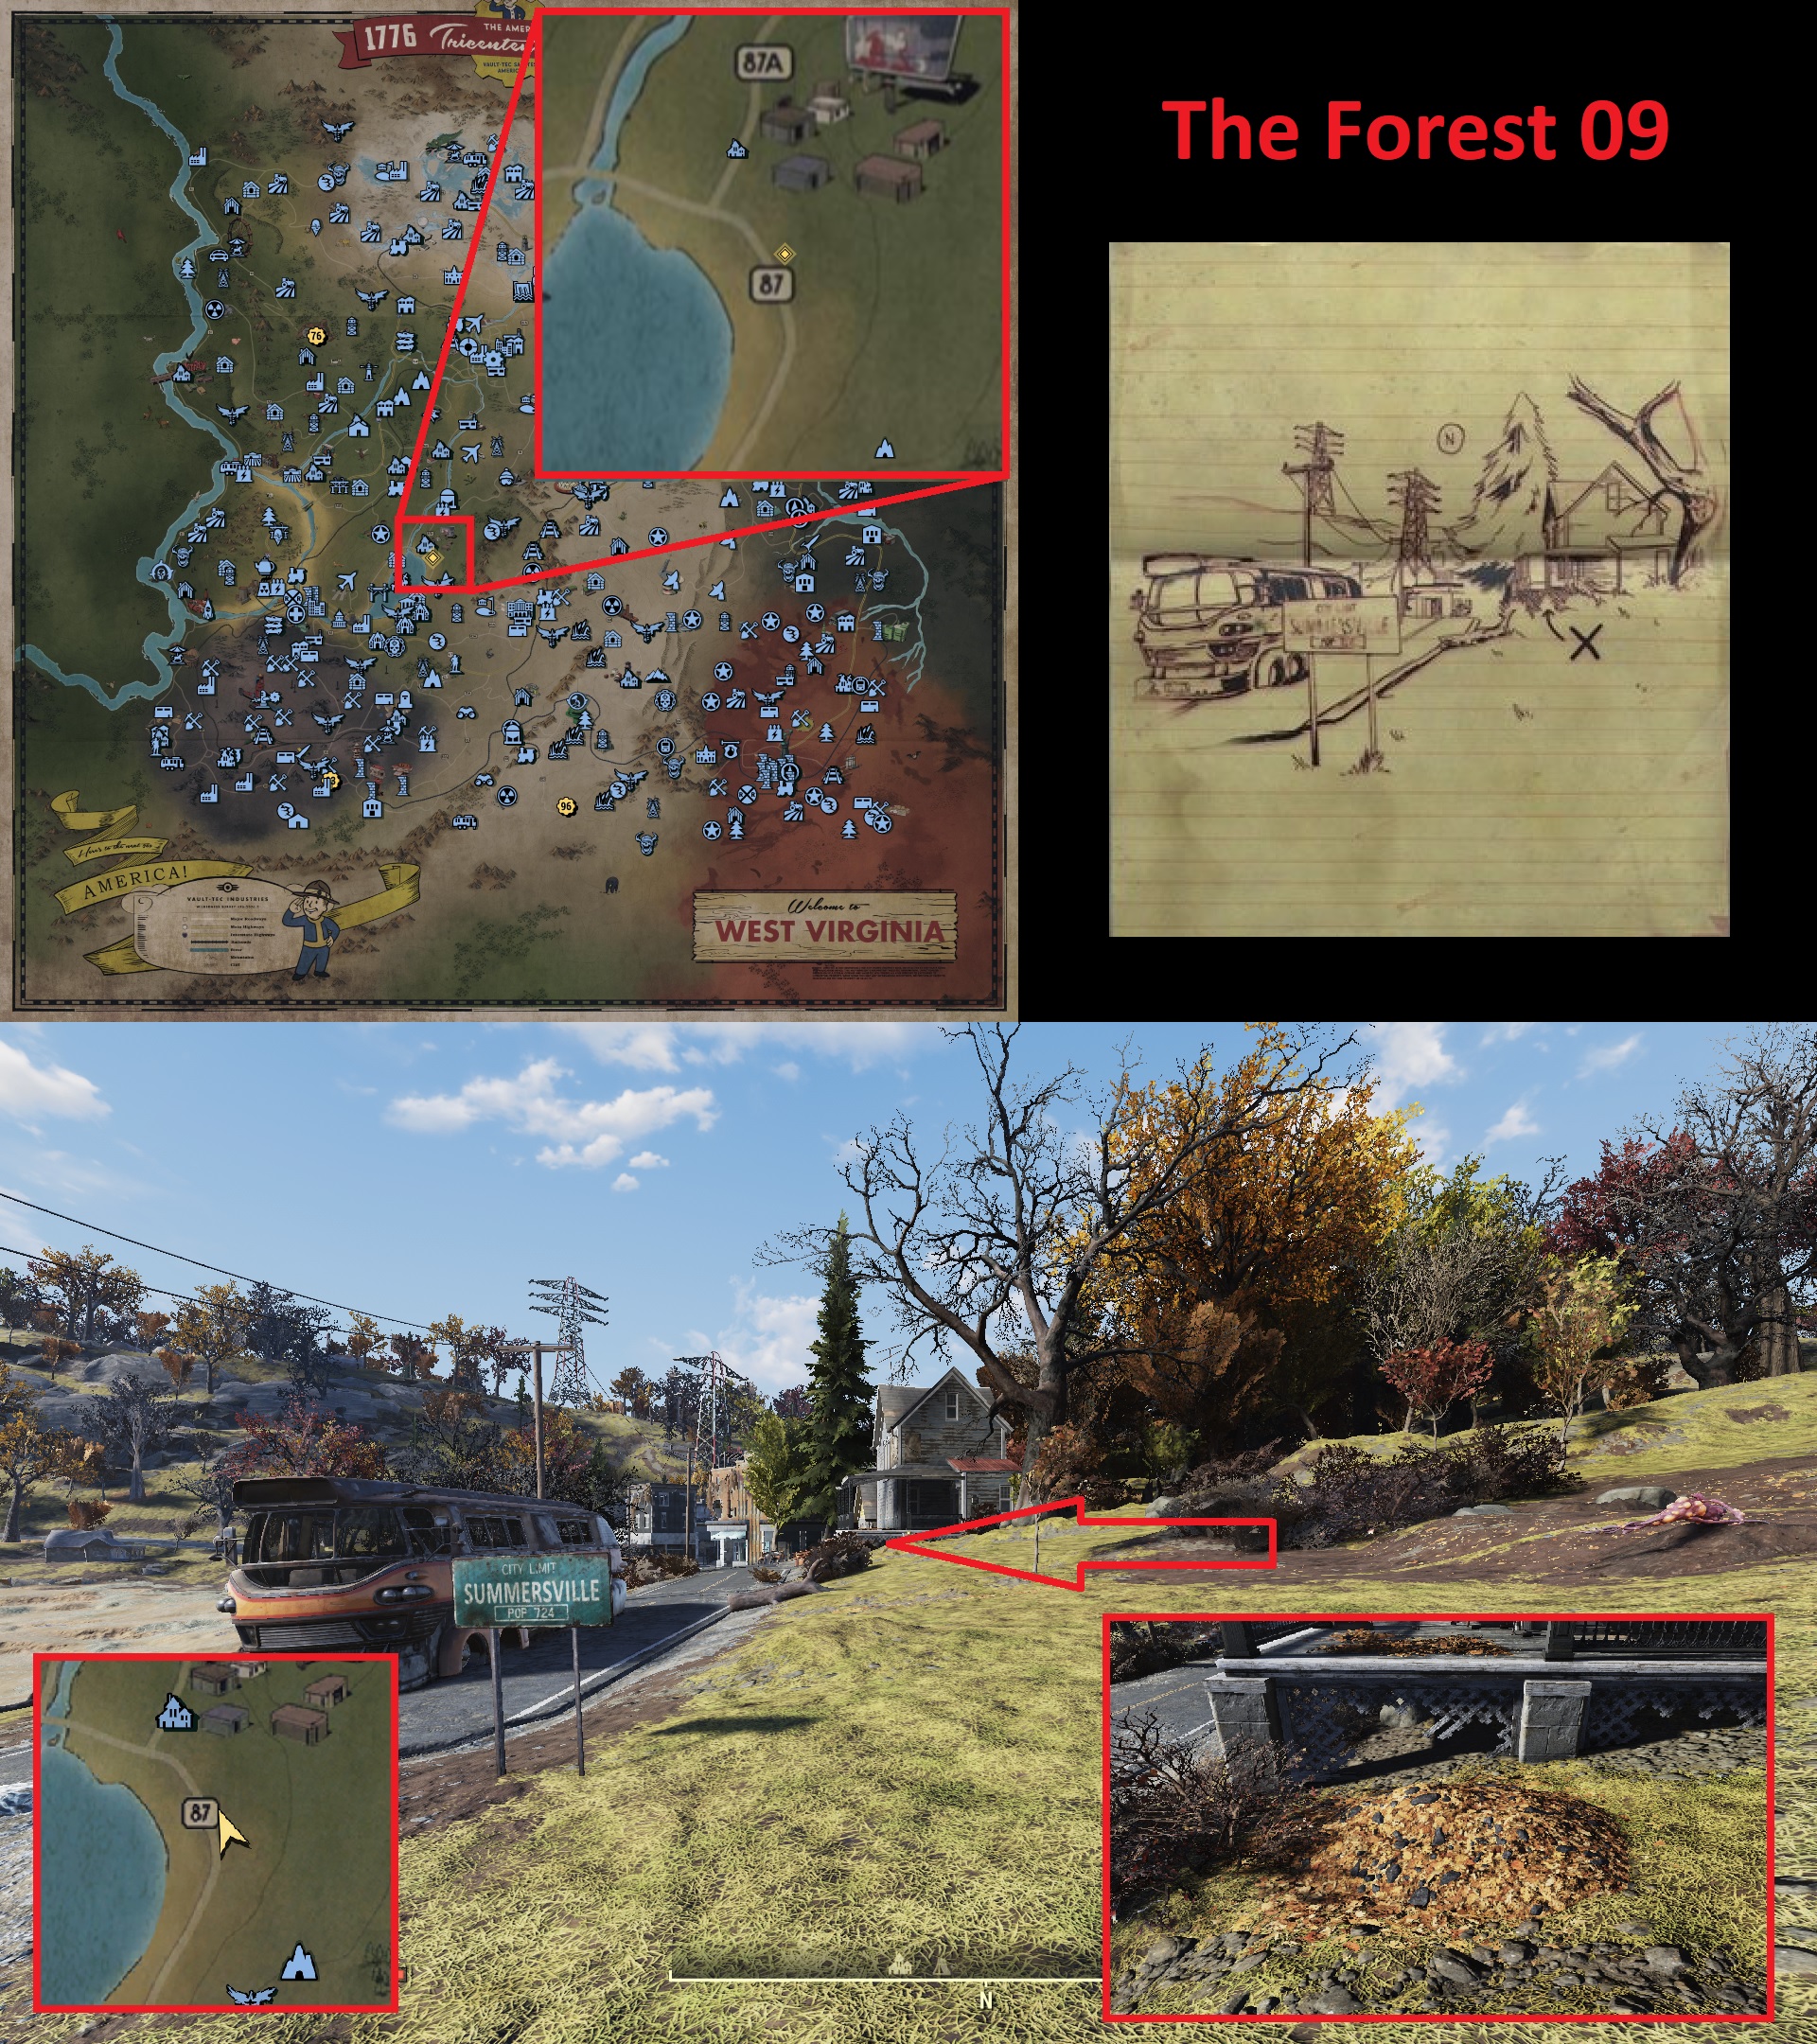 Fallout 76 Treasure Map Locations - The Forest 09 - 62ADEC4